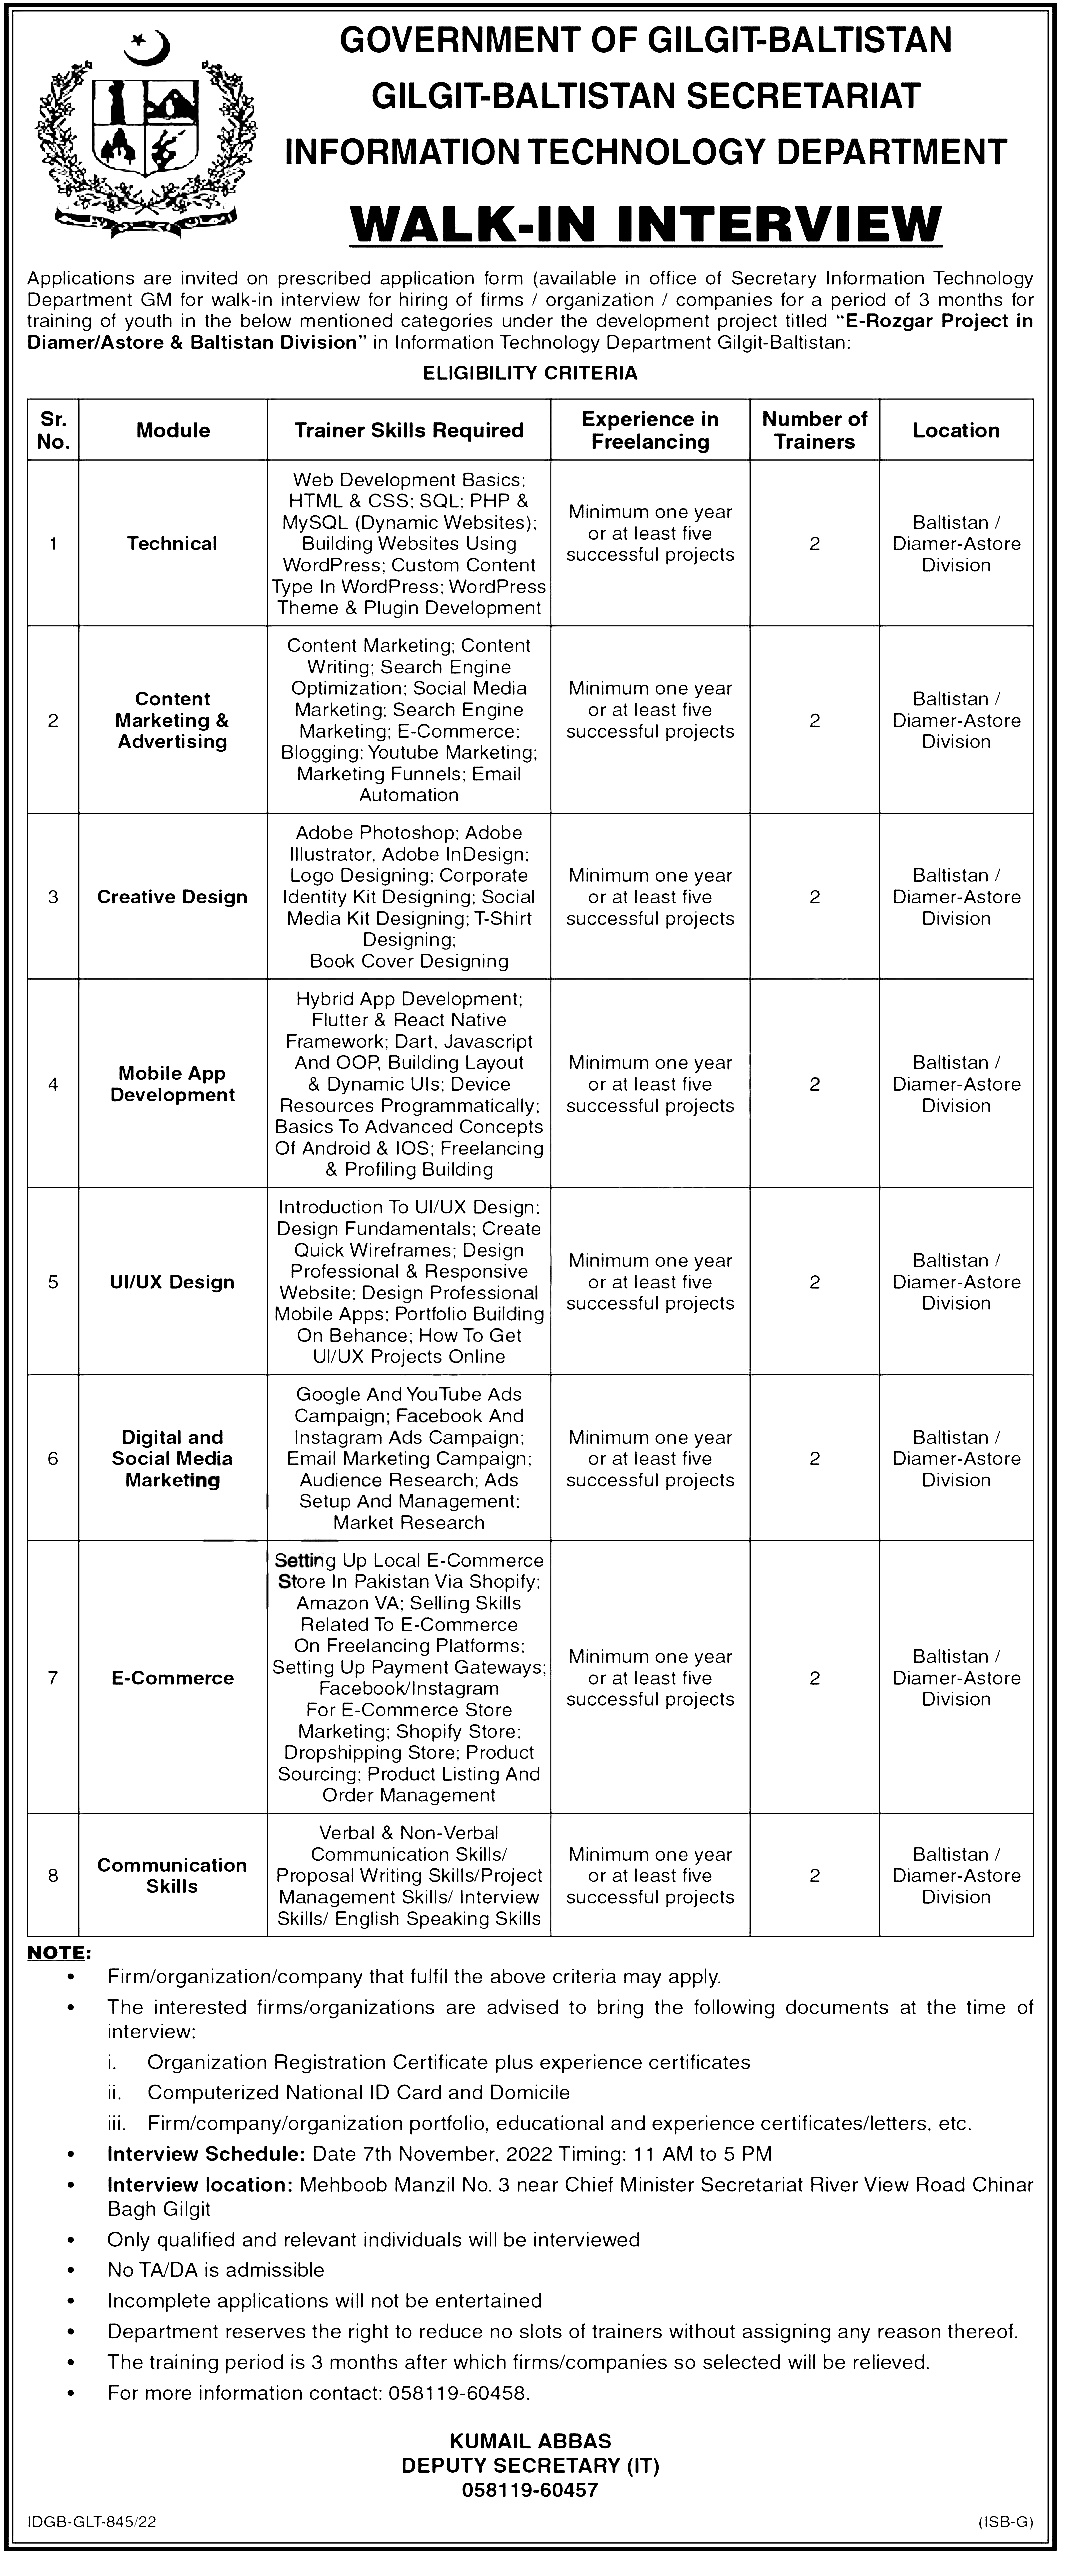 Gilgit Baltistan IT Department Hiring Youth Training Firm ad